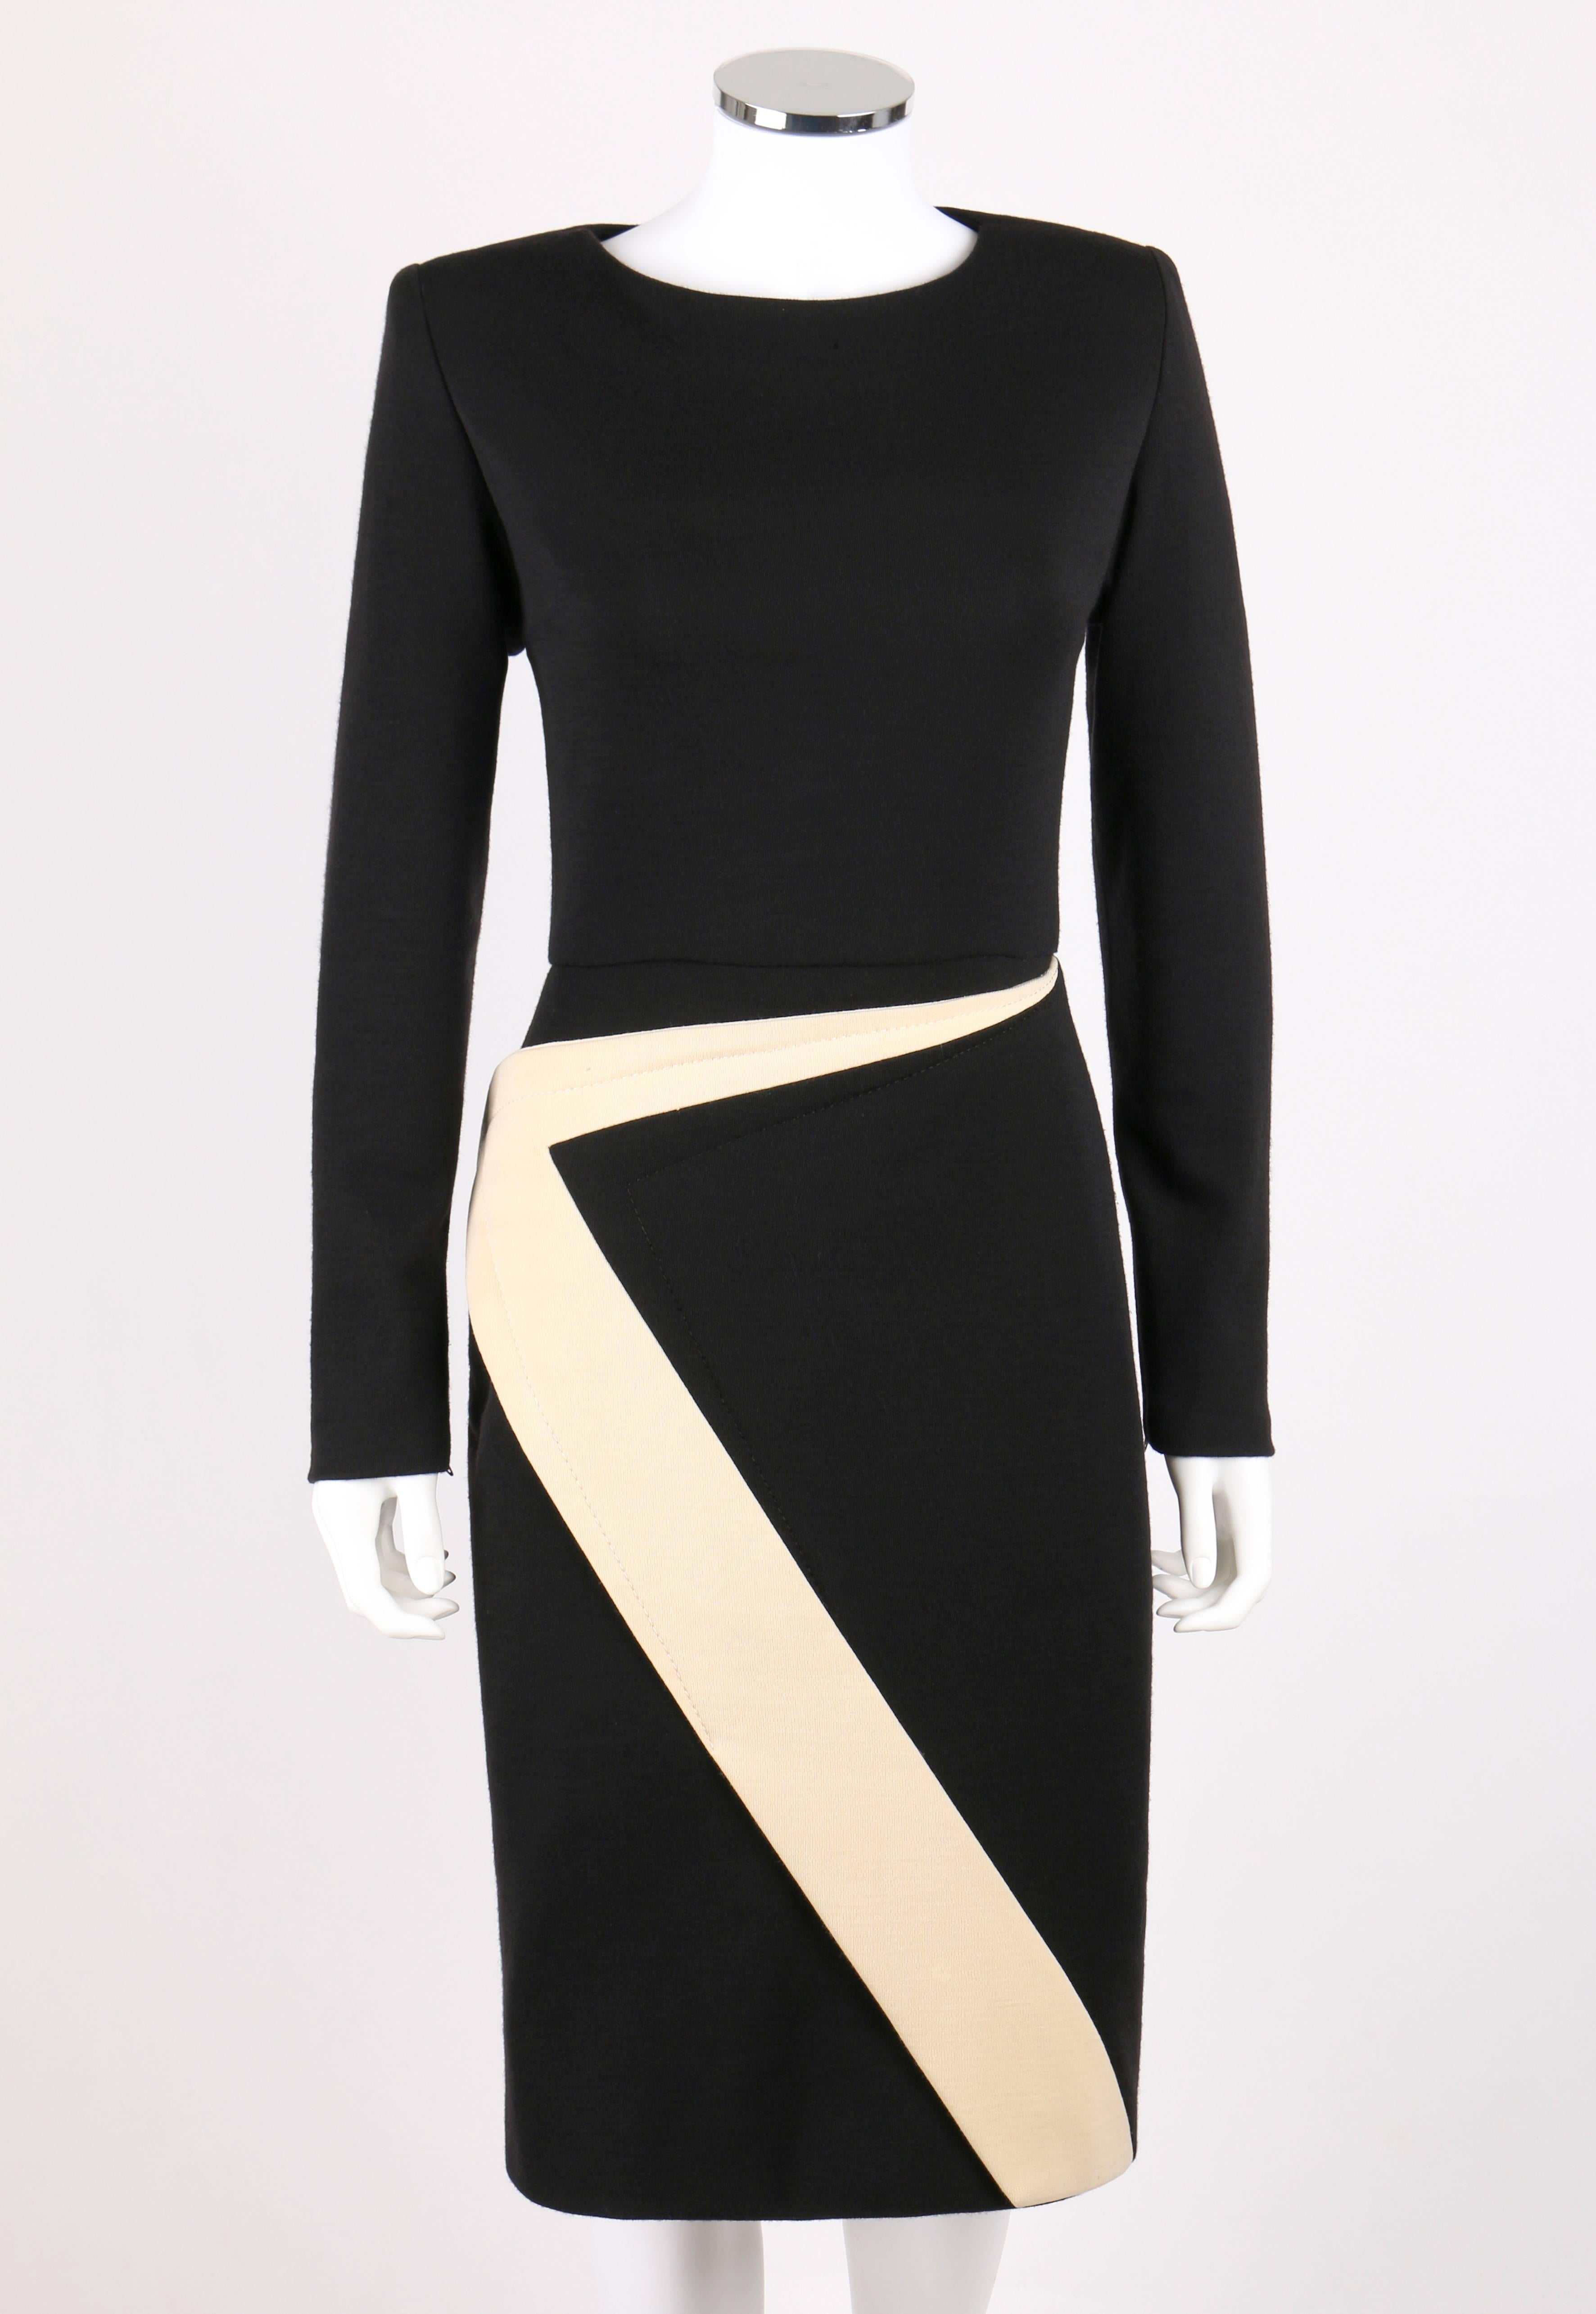 Vintage Galanos c.1980's wool knit shift dress. Black crew neckline dress. Long sleeves with zipper closures at cuffs. Ivory geometric avant garde zig zag detail from waistline to hem forming front wrap panel. Center back zipper closure with hook